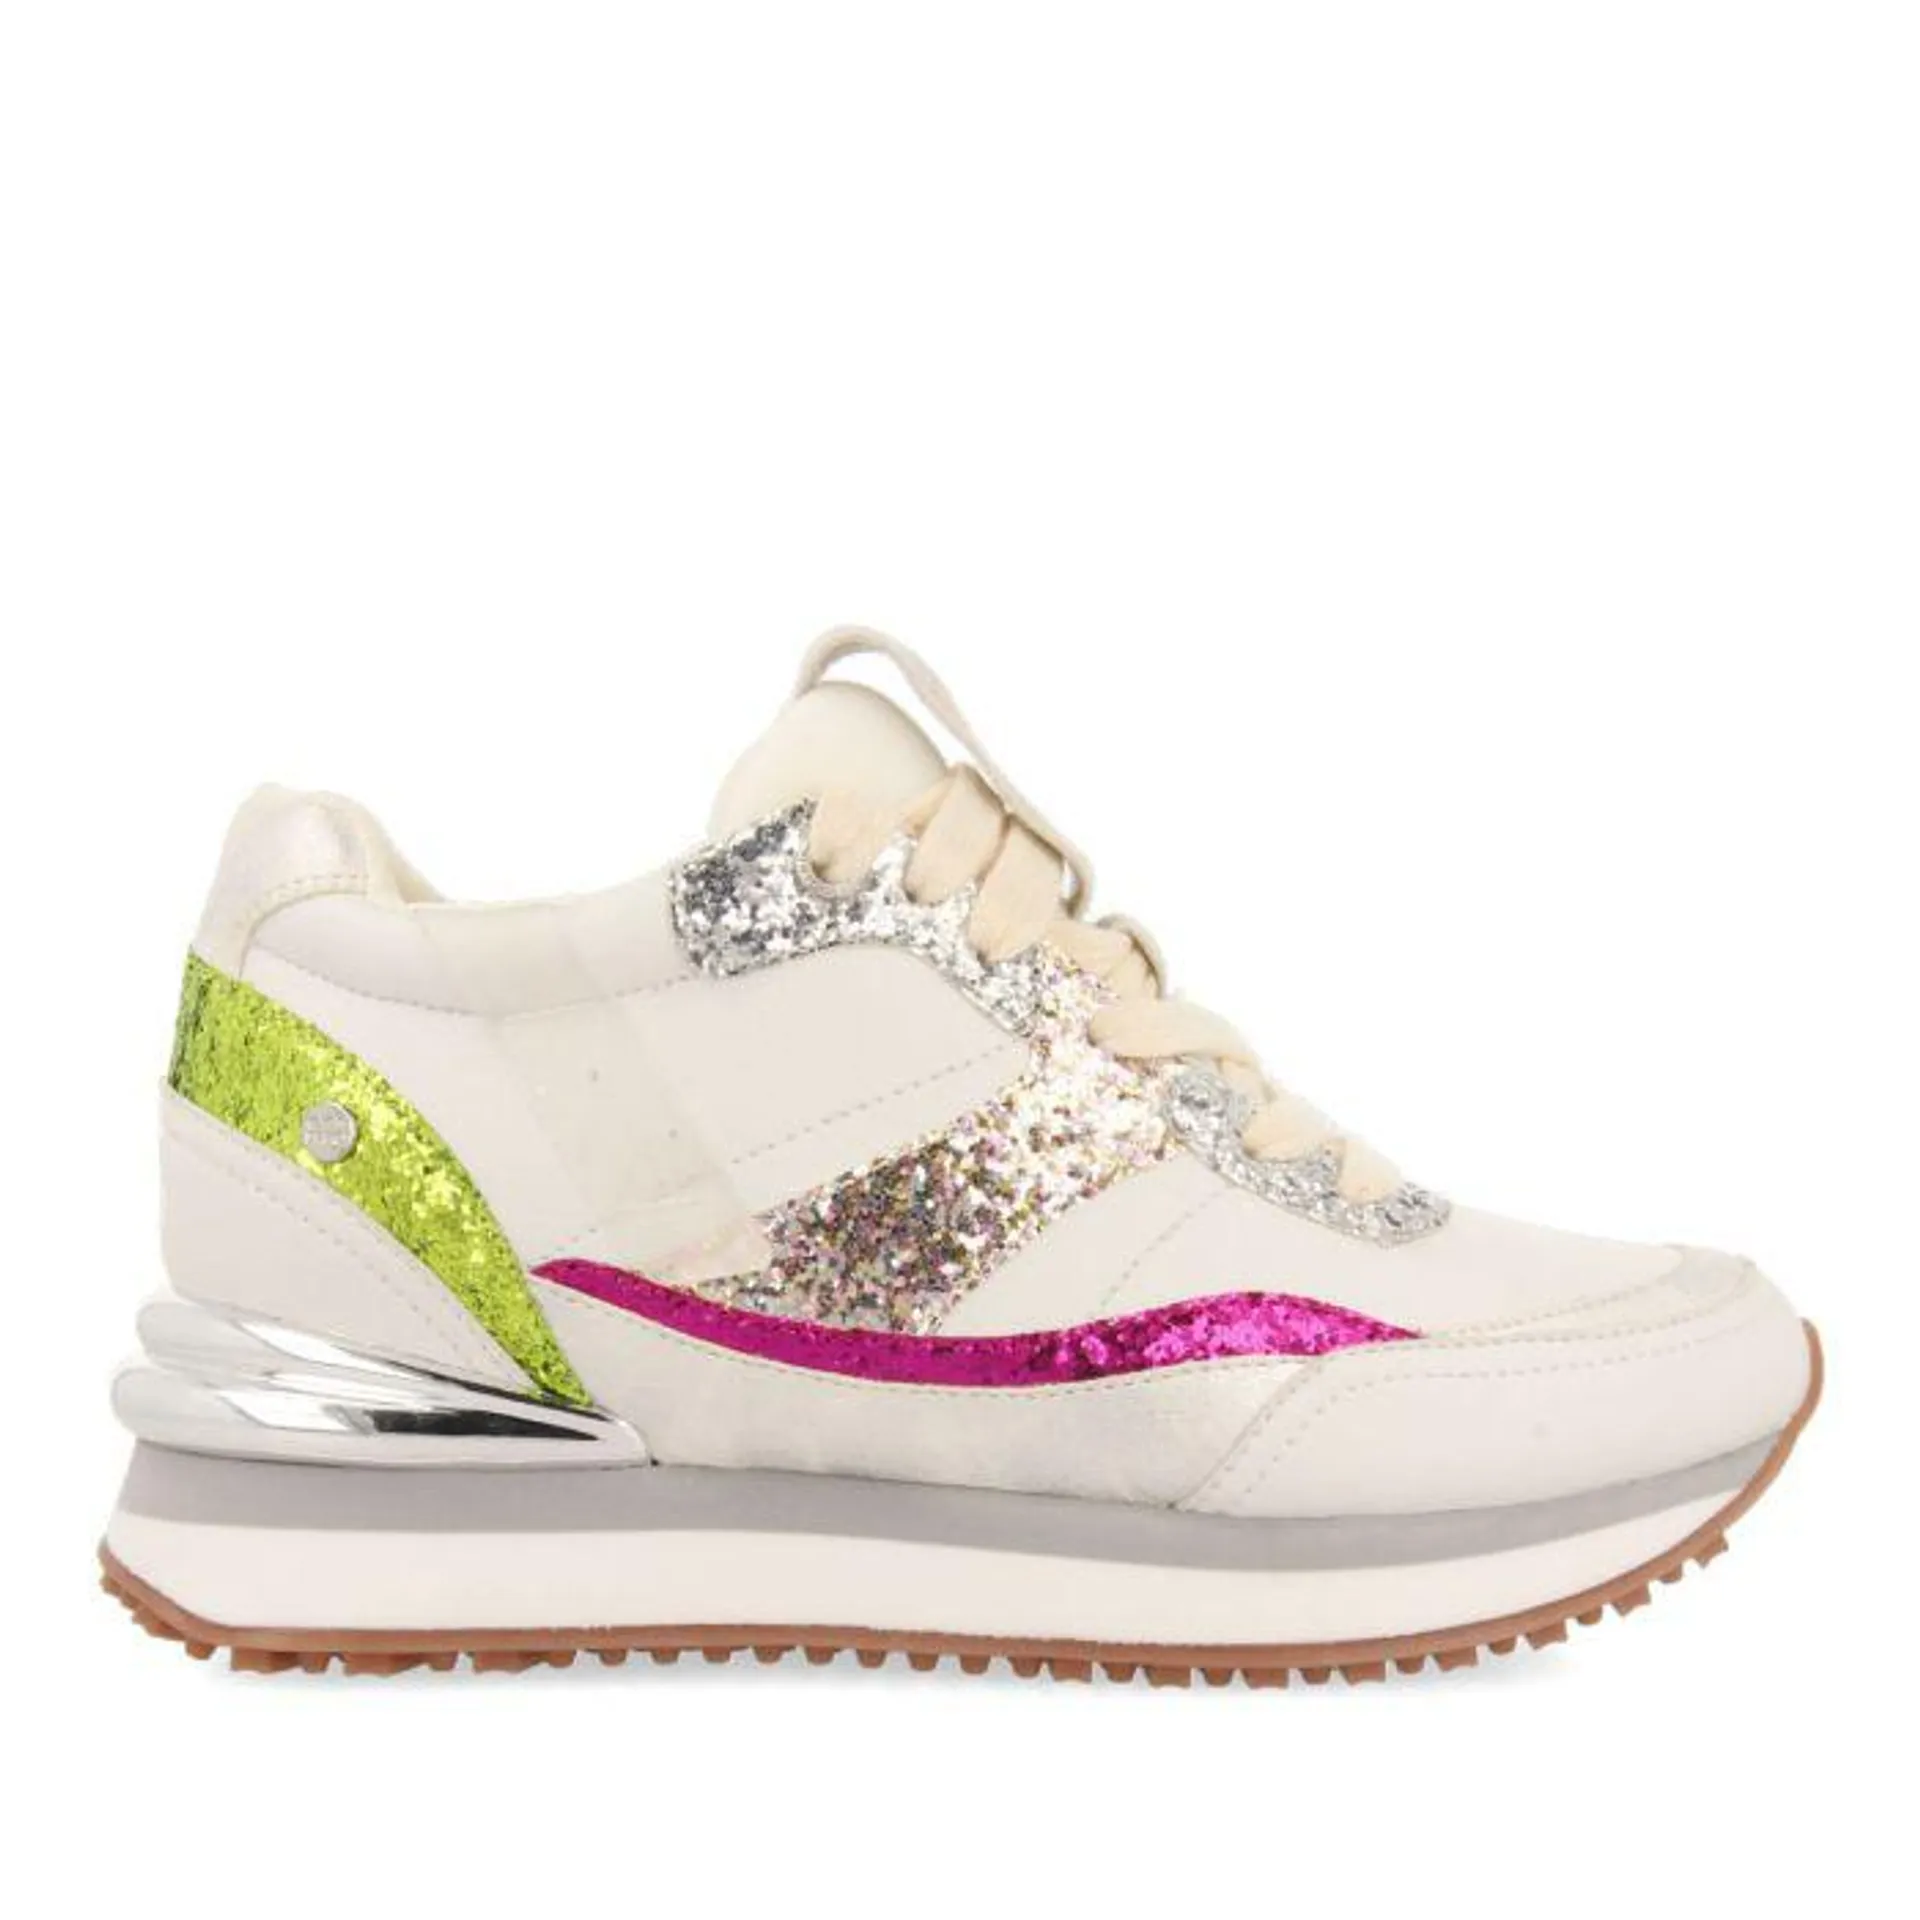 Bassou women's white sneakers with inner wedges and glittery details